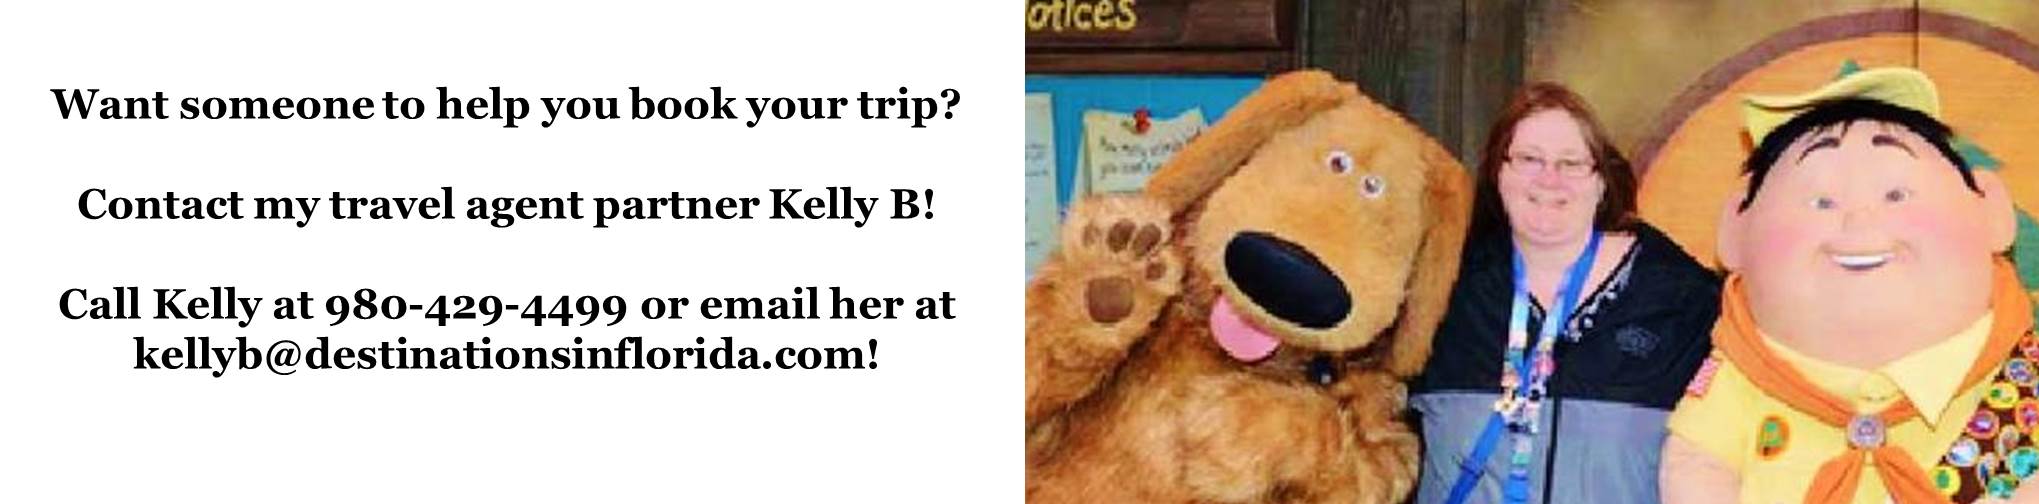 Kelly B Can Help You Book Your Trip